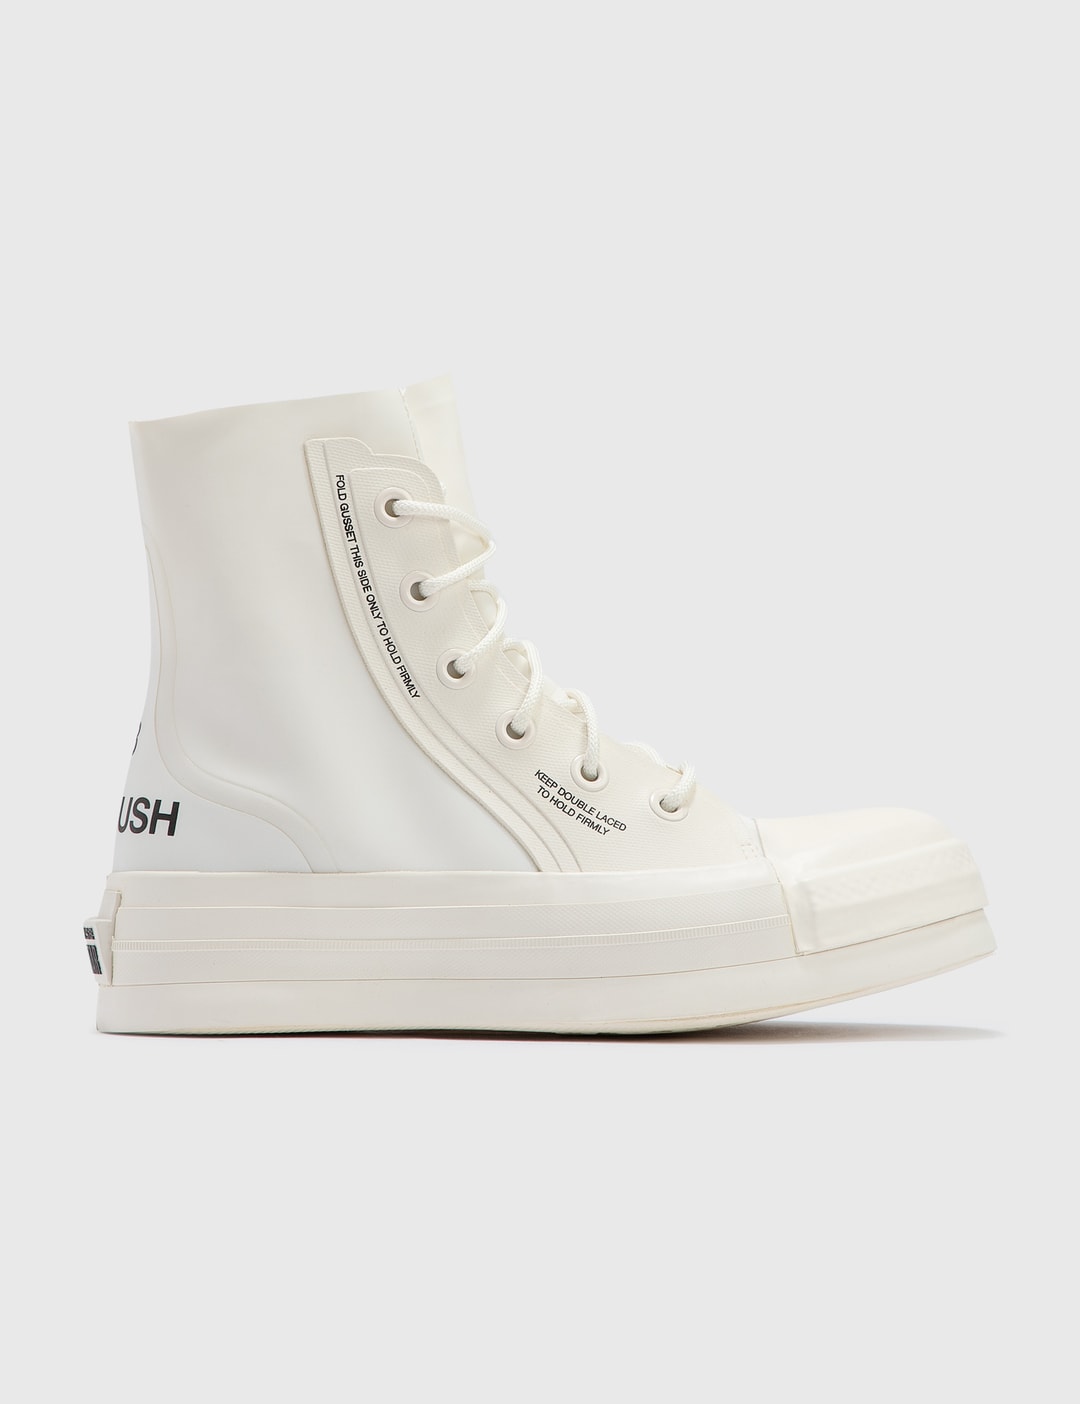 Converse - Ambush X Converse Chuck 70 Hi | - Globally Curated Fashion and Lifestyle by Hypebeast